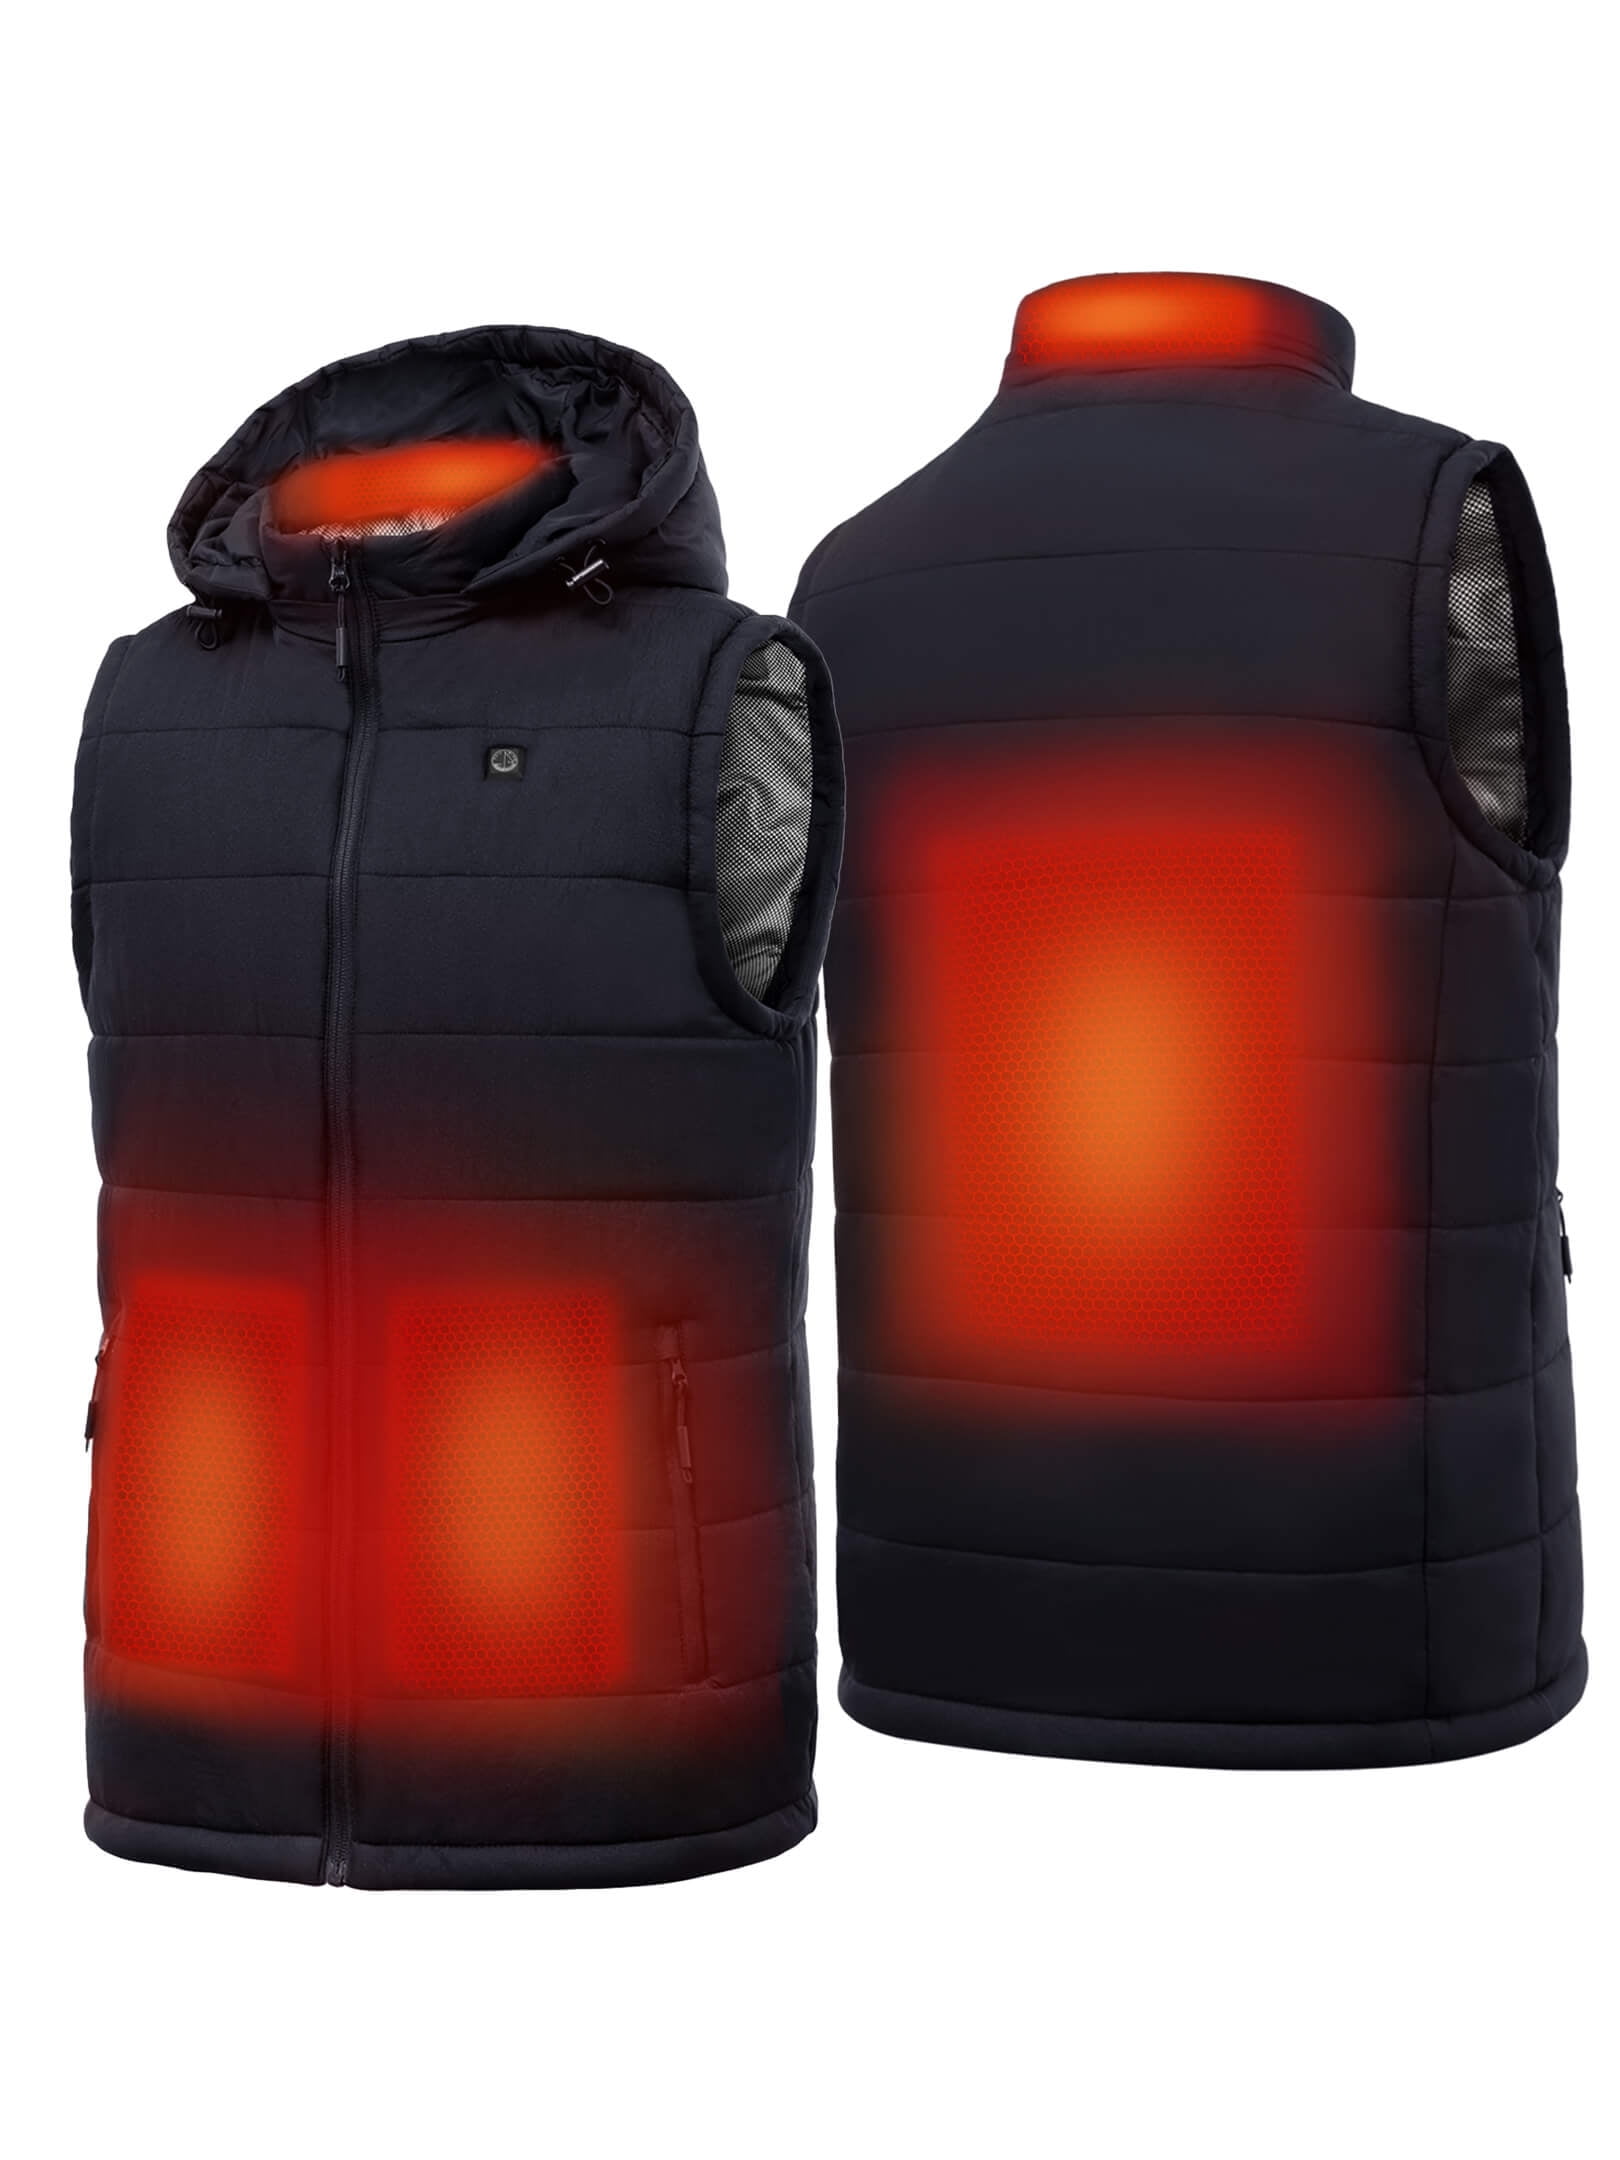 Men's Heated Vest with Battery Pack Lightweight Electric Heating Jacket for Men USB Rechargeable Waistcoat with Pockets 